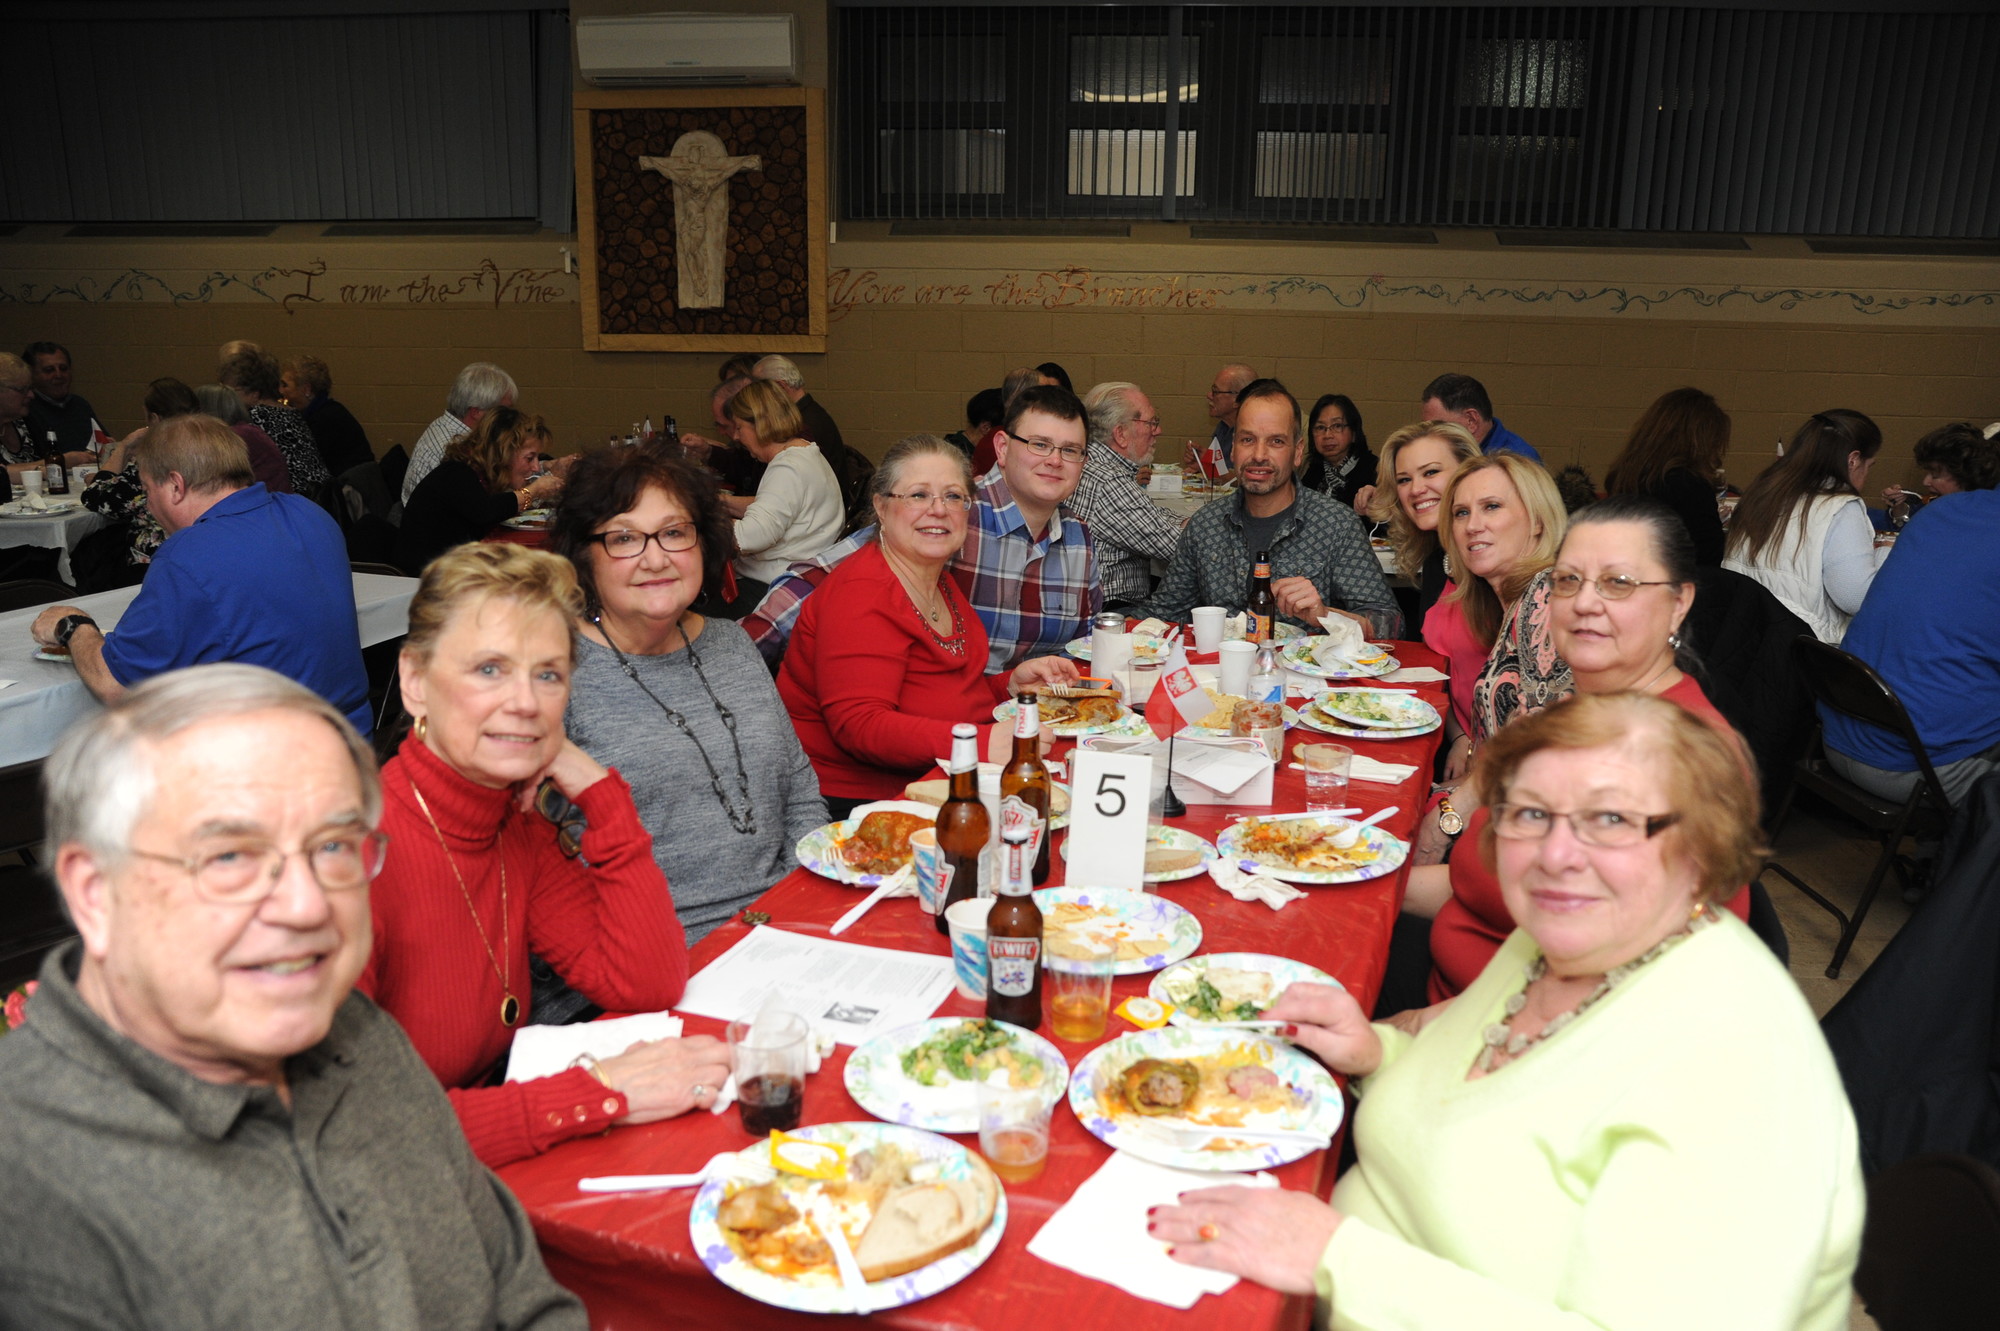 East Meadow residents enjoyed each other’s company at the Pope Pius XII Council Knights of Columbus’ fourth annual Polish Knight at St. Raphael’s.